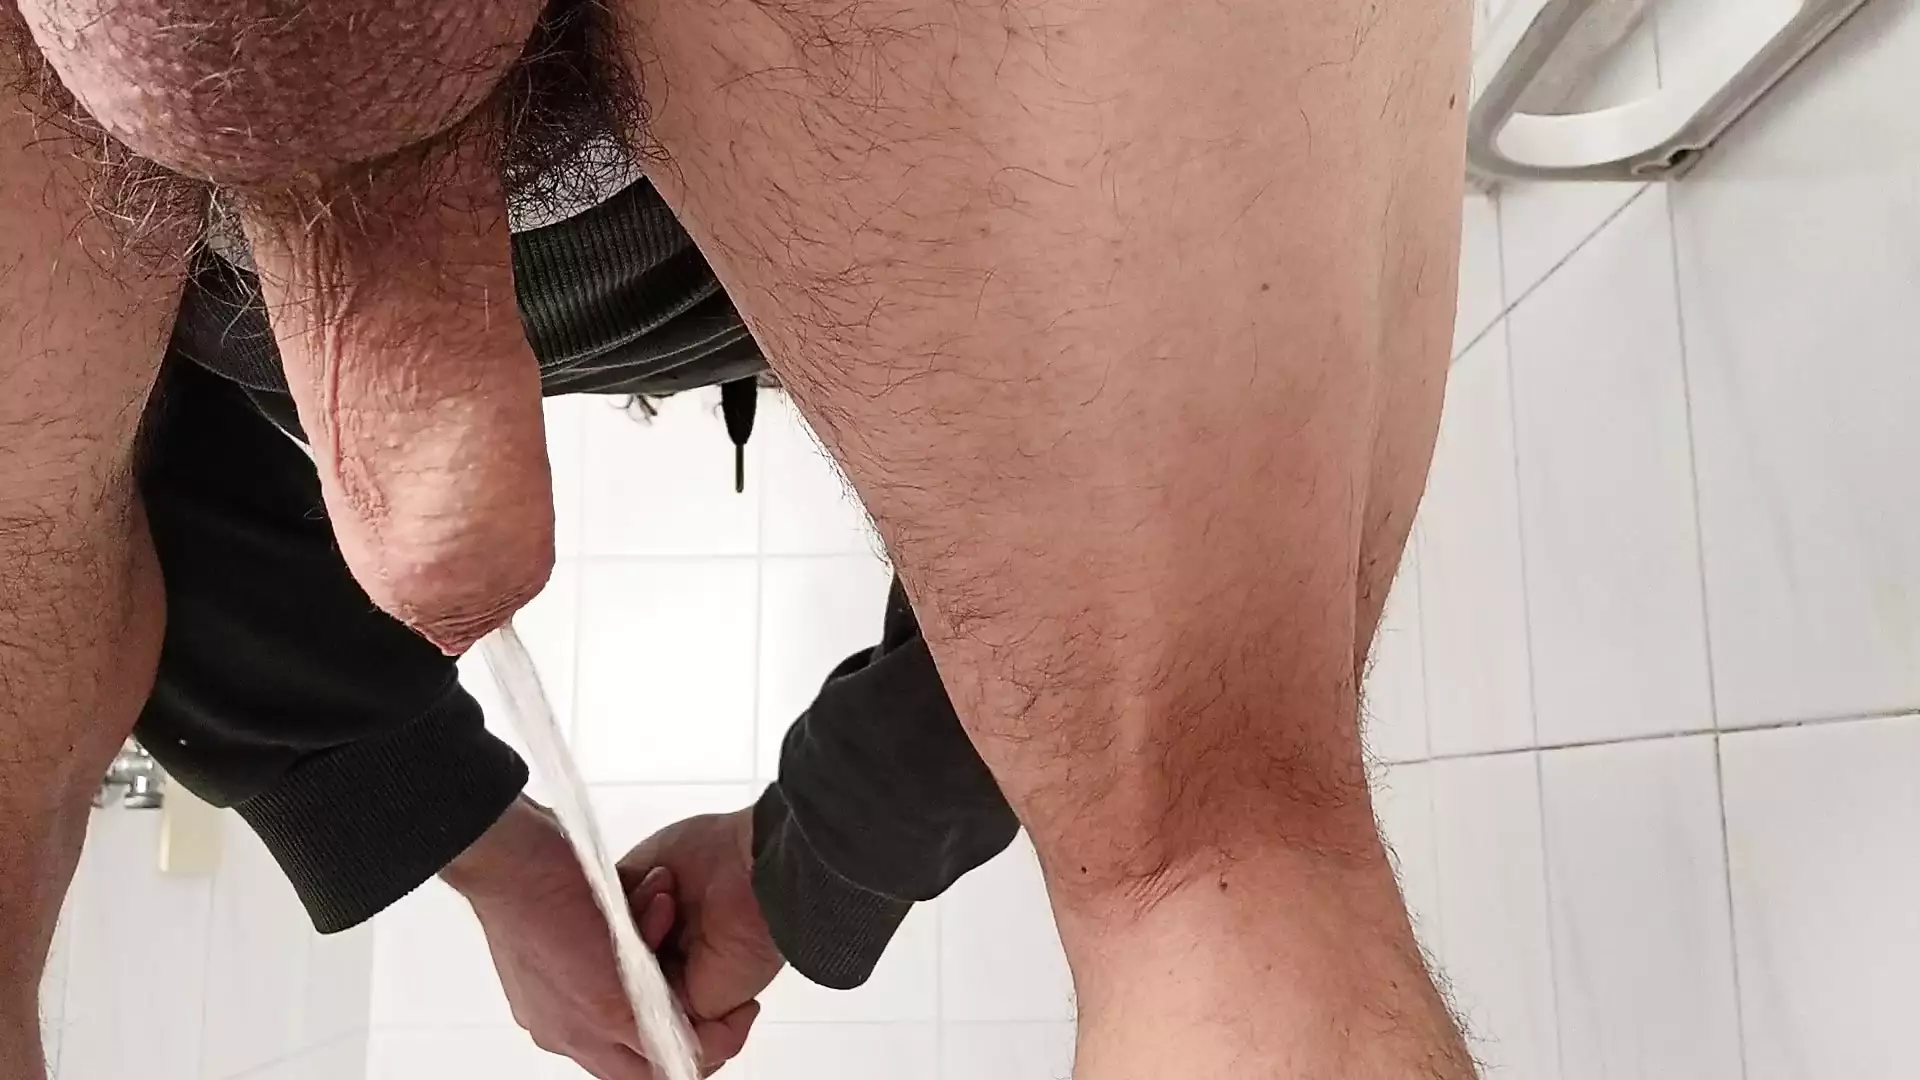 can you suck my hairy balls when I pee? image